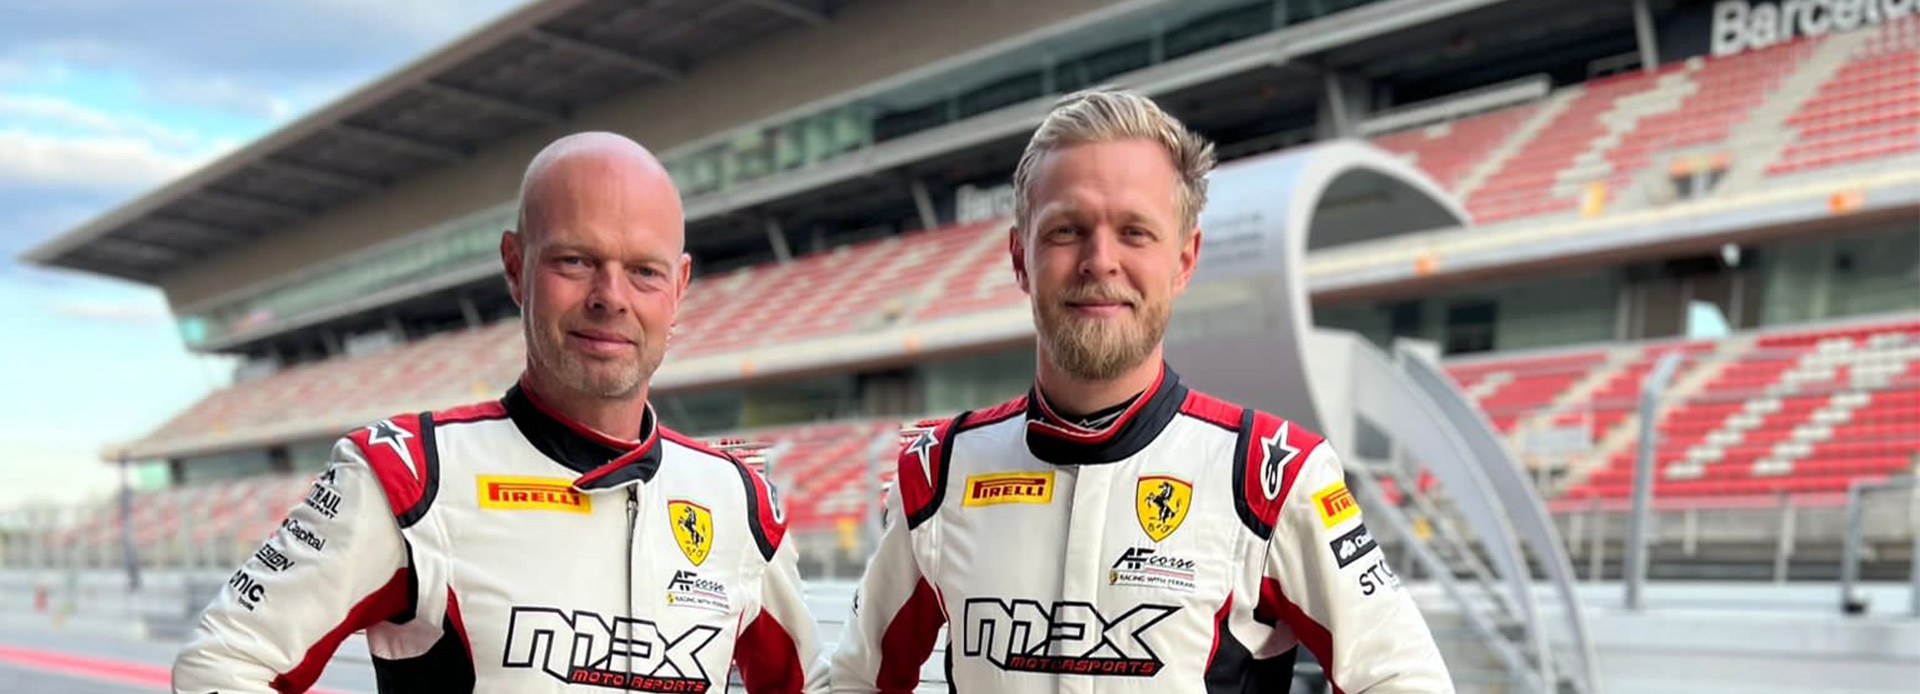 slutpunkt Elendighed thespian Jan and Kevin Magnussen to compete at Gulf 12 Hours at YMC